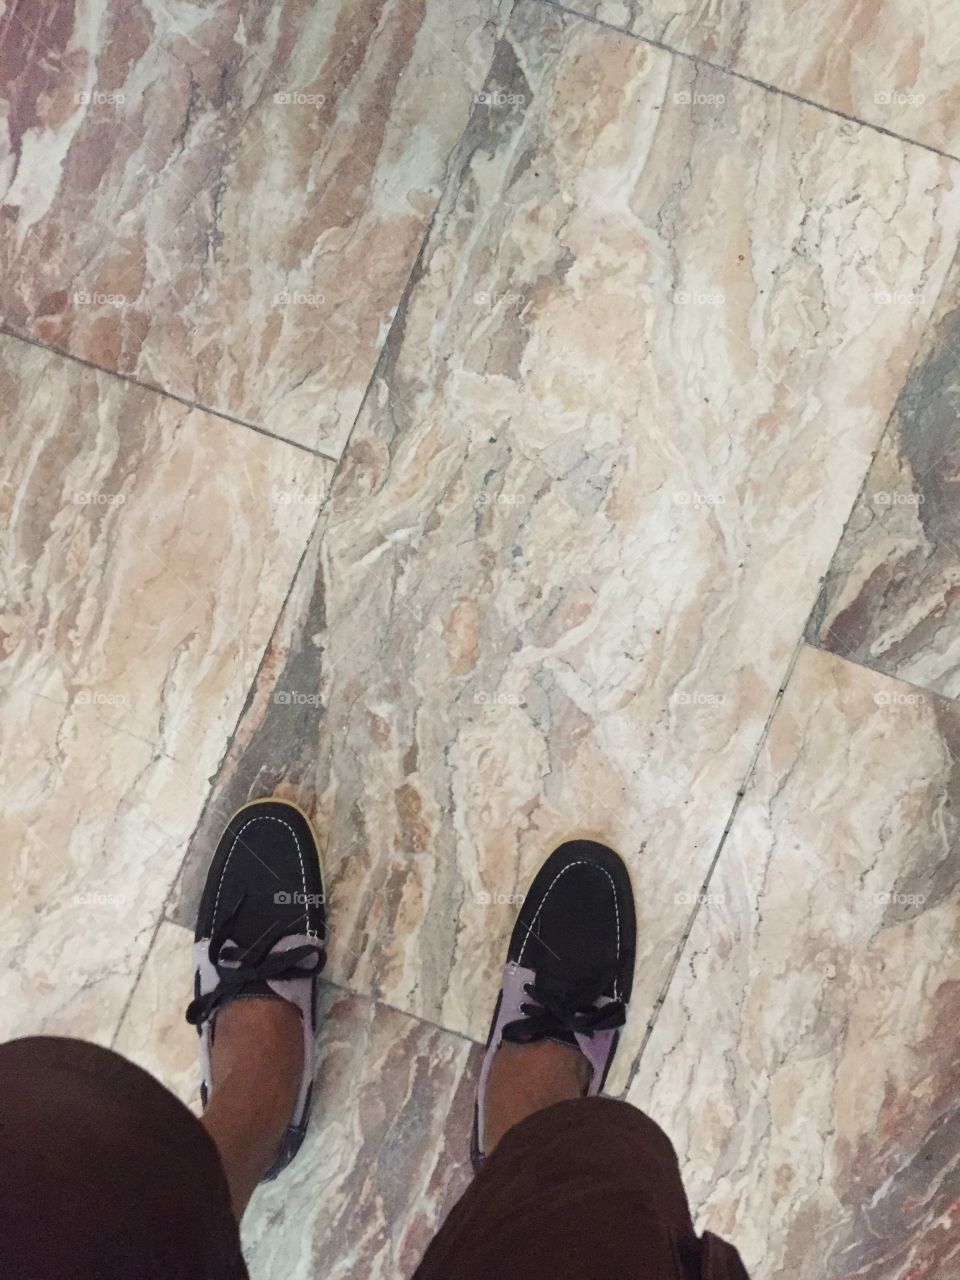 Tiles and Shoes